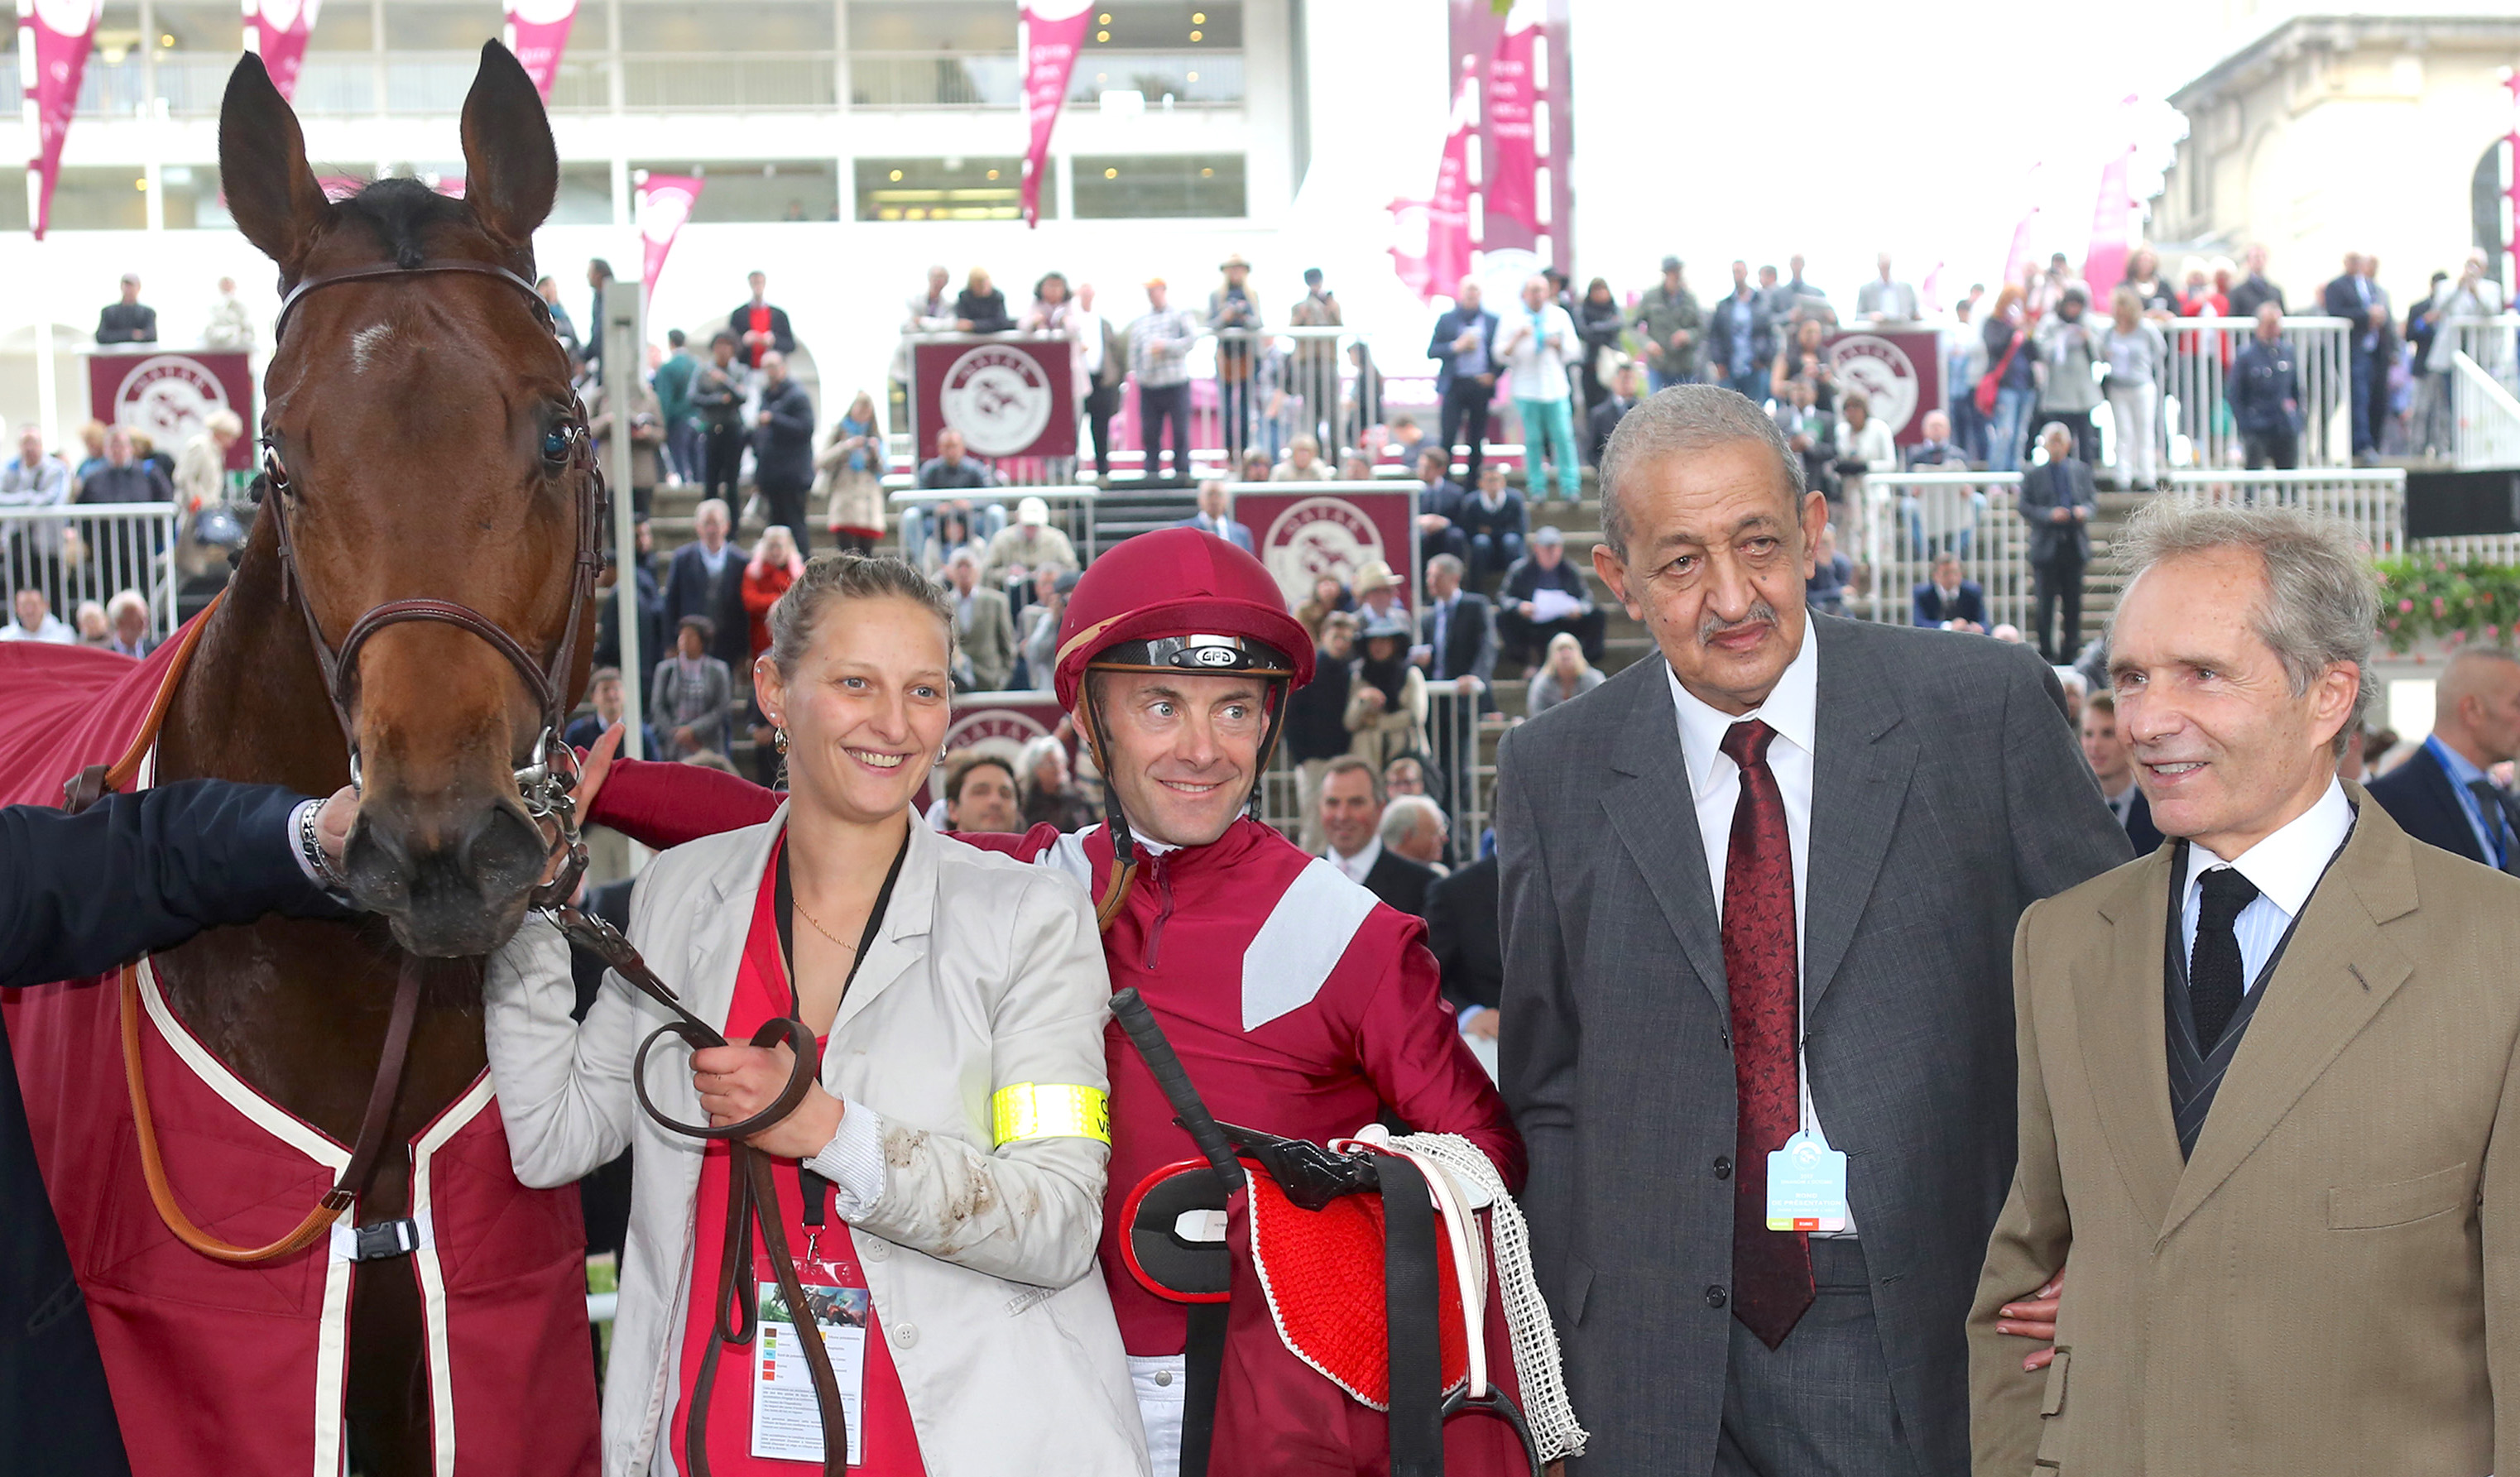 Star stallion: Mishriff’s sire Make Believe with jockey Olivier Peslier, Prince Faisal and trainer Andre Fabre (right) after winning the G1 Prix de la Foret at Longchamp in 2015. Photo: Frank Sorge/racingfotos.com